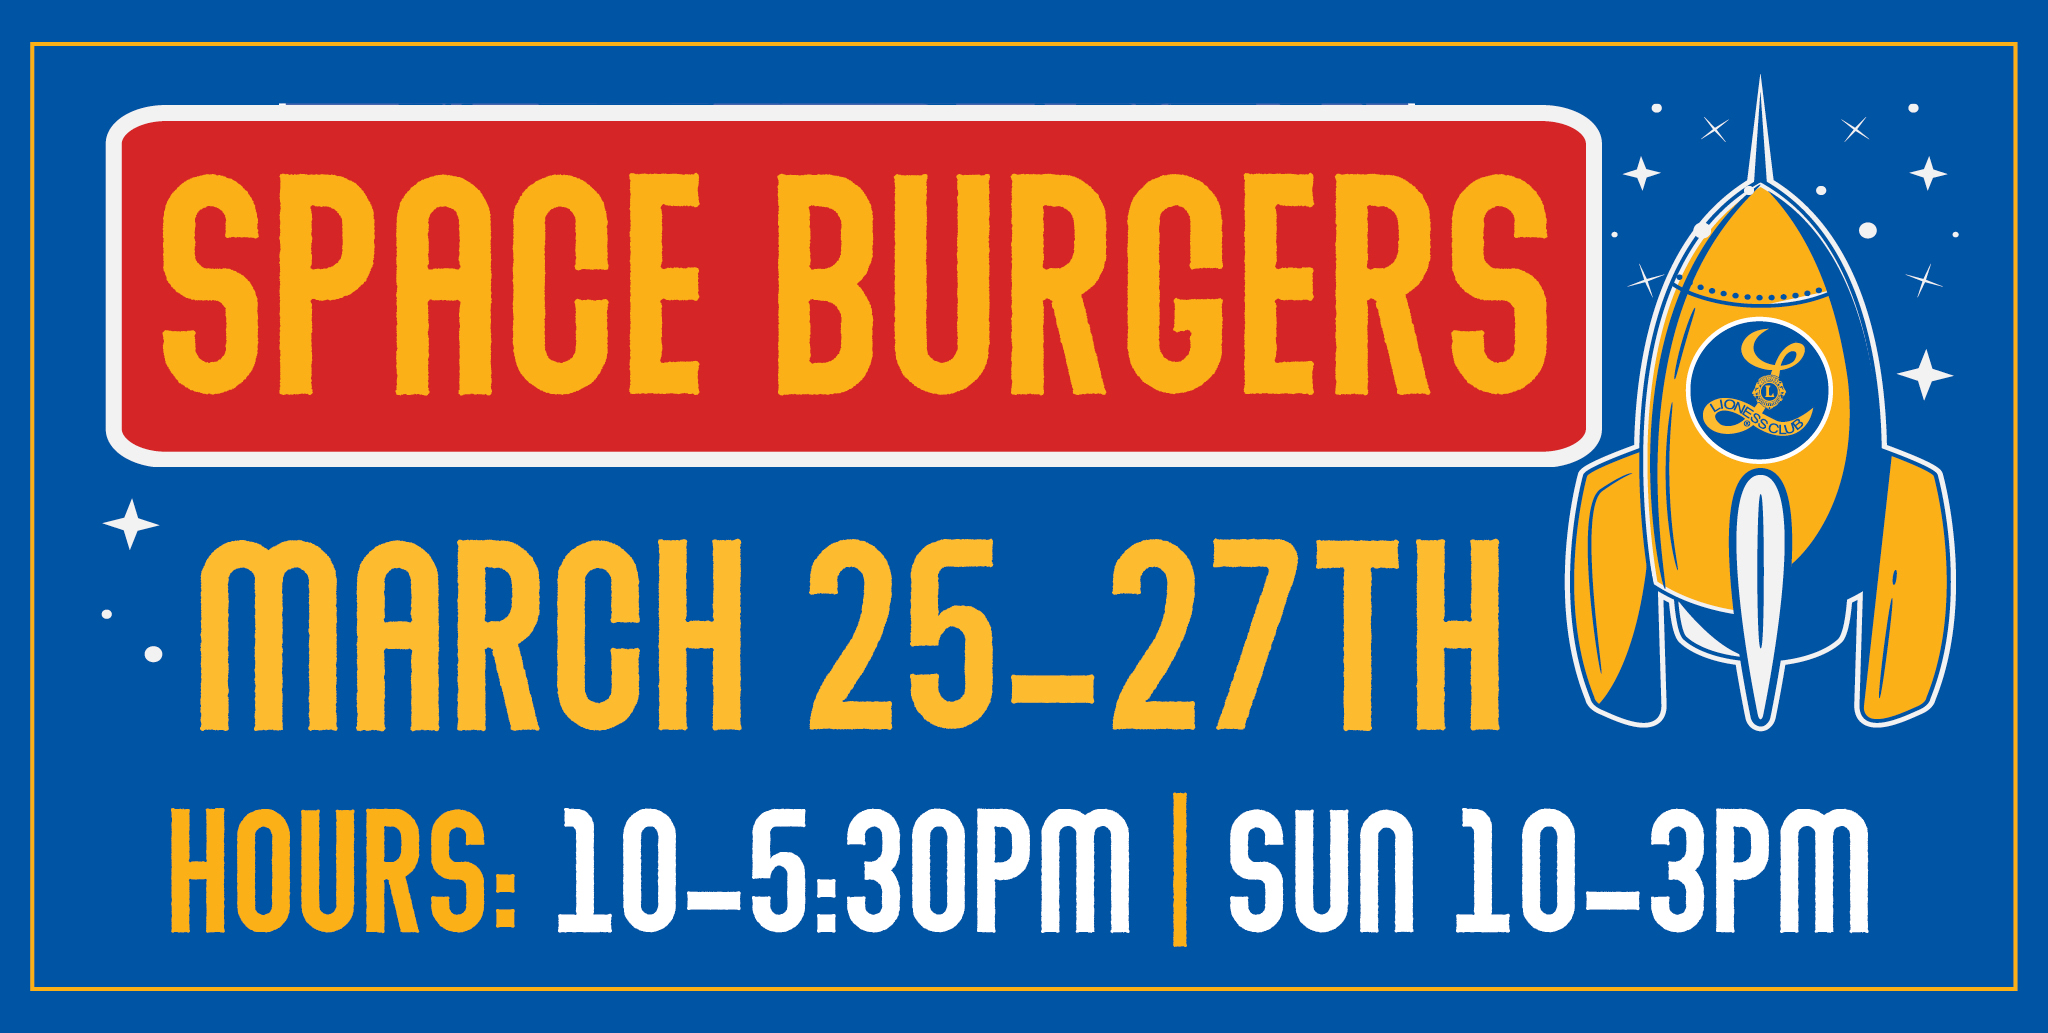 <h1 class="tribe-events-single-event-title">Get Your Space Burgers!</h1>